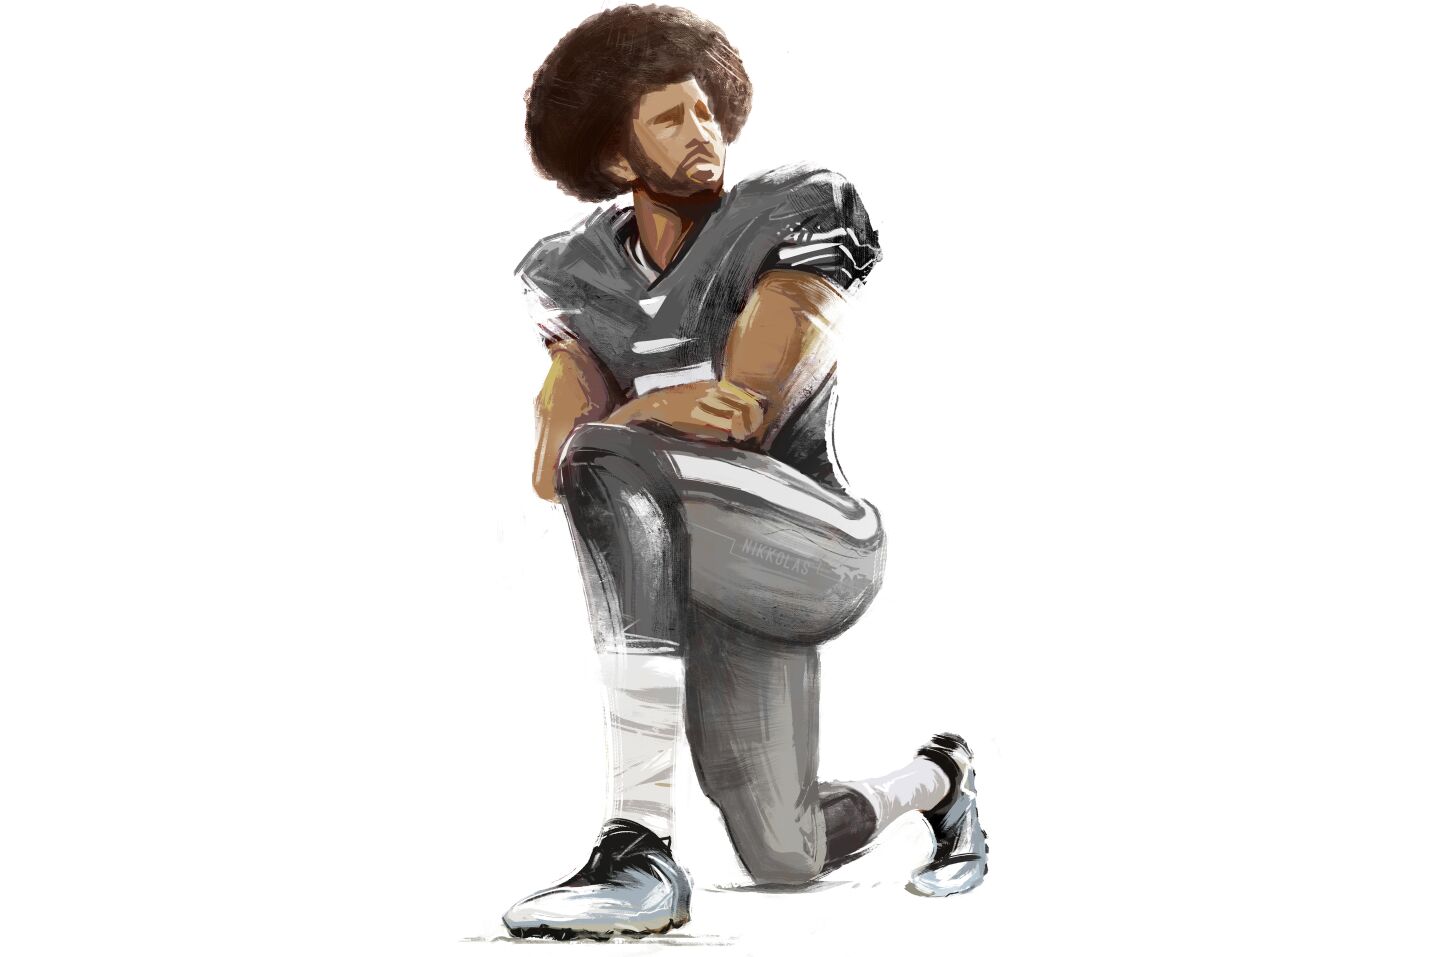 A painting of Colin Kapernick taking a knee in portest of police brutality went viral.